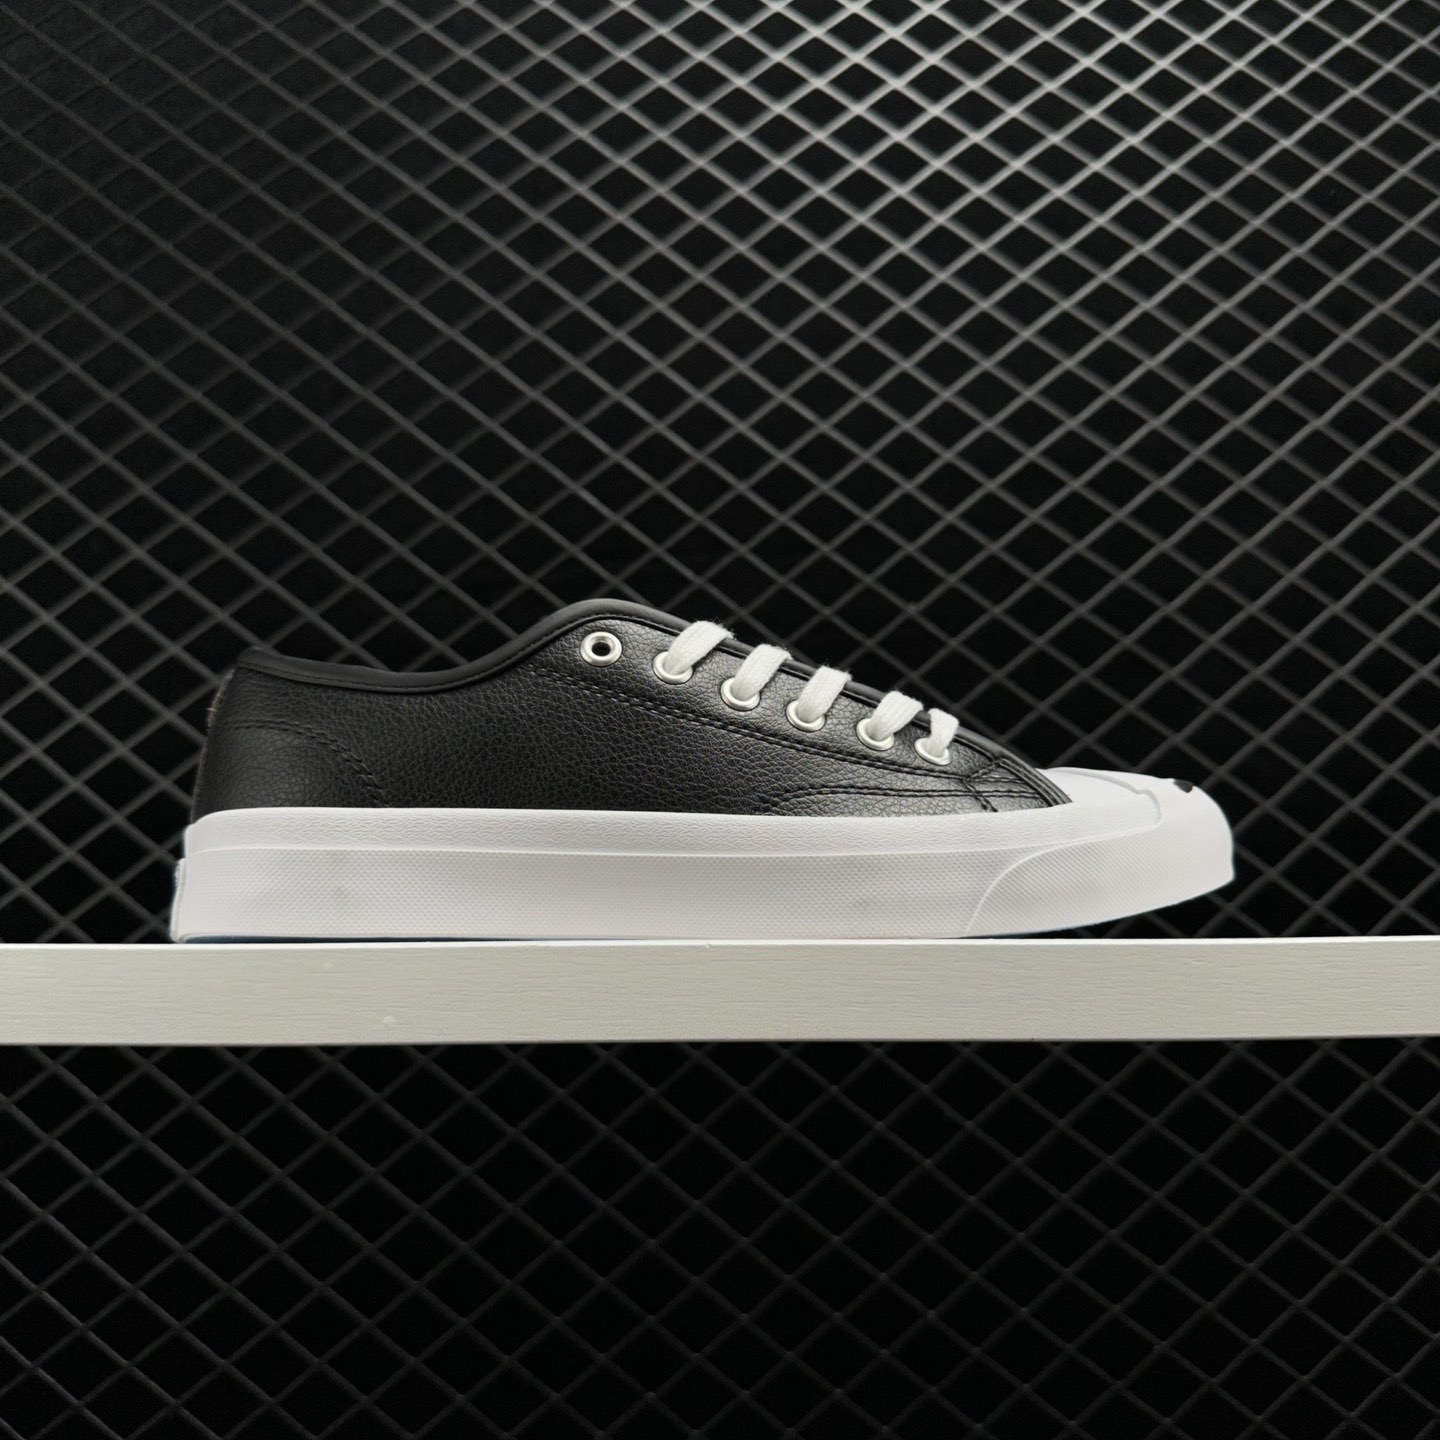 Converse Jack Purcell Ox 'Leather' Black 1S962 - Stylish and Sleek Footwear for Every Occasion